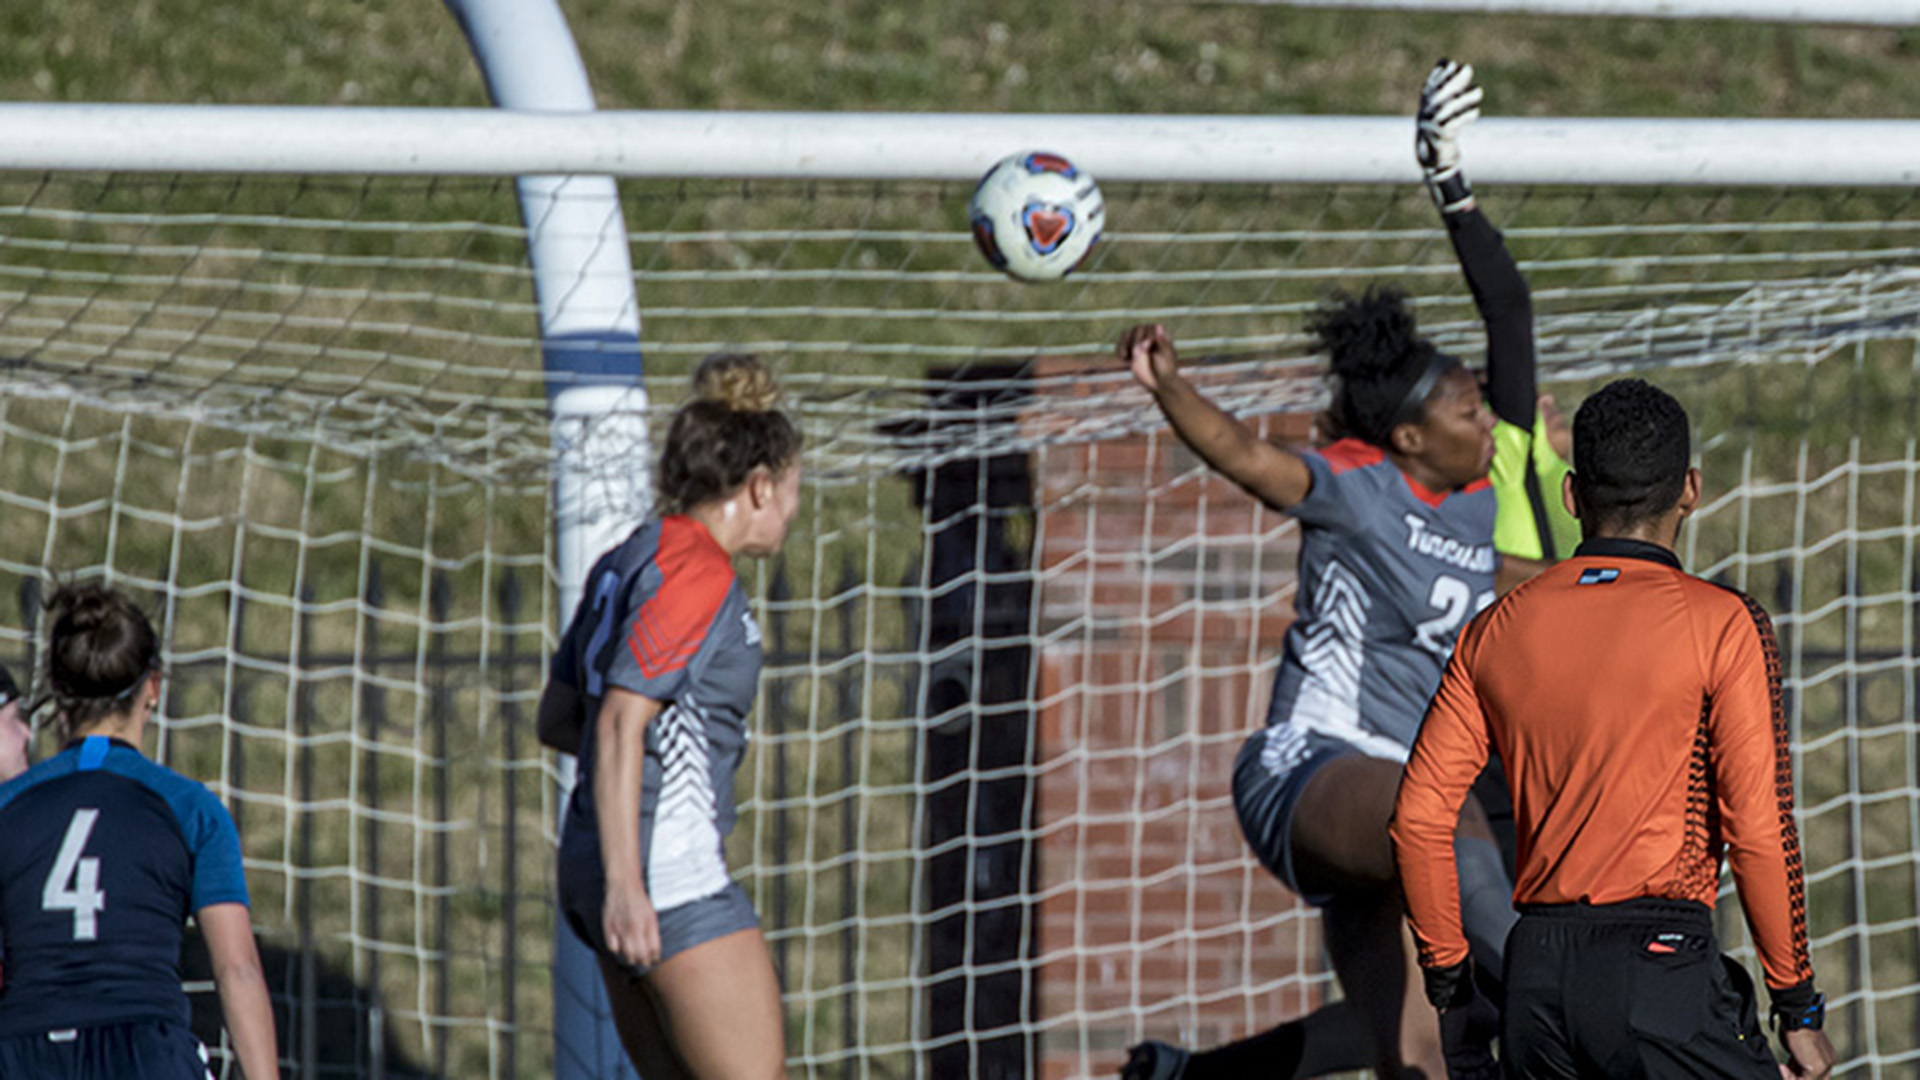 Kenzie Ellenburg connects on the header to give Tusculum a 1-0 lead (photo by Chuck Williams)